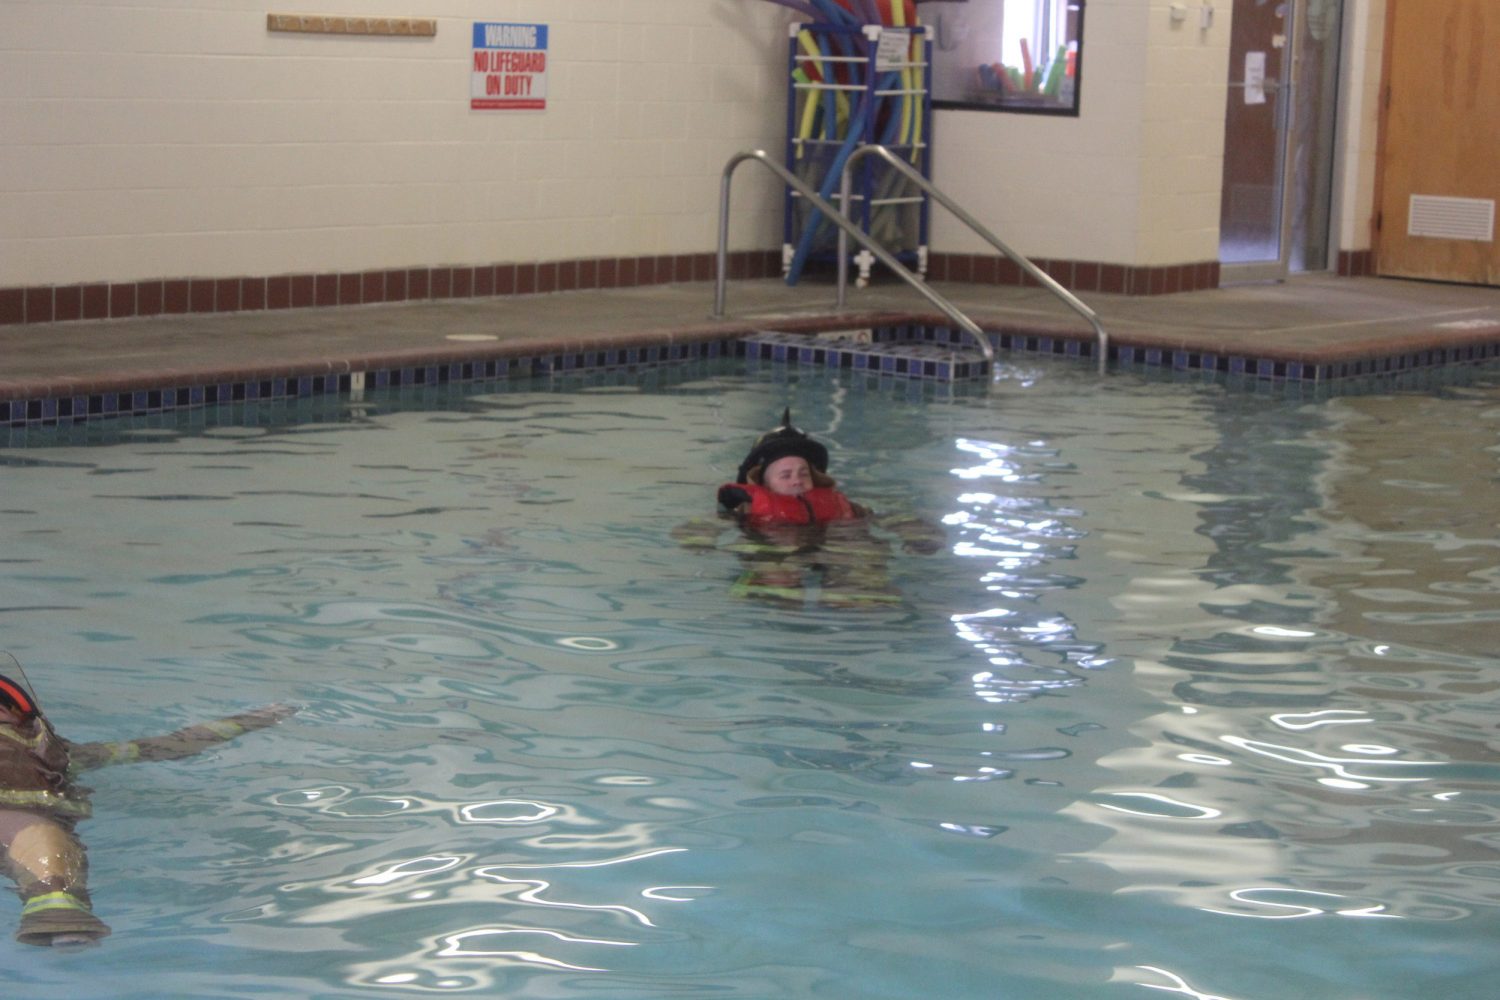 Video: Water exercise yields answers for MFD